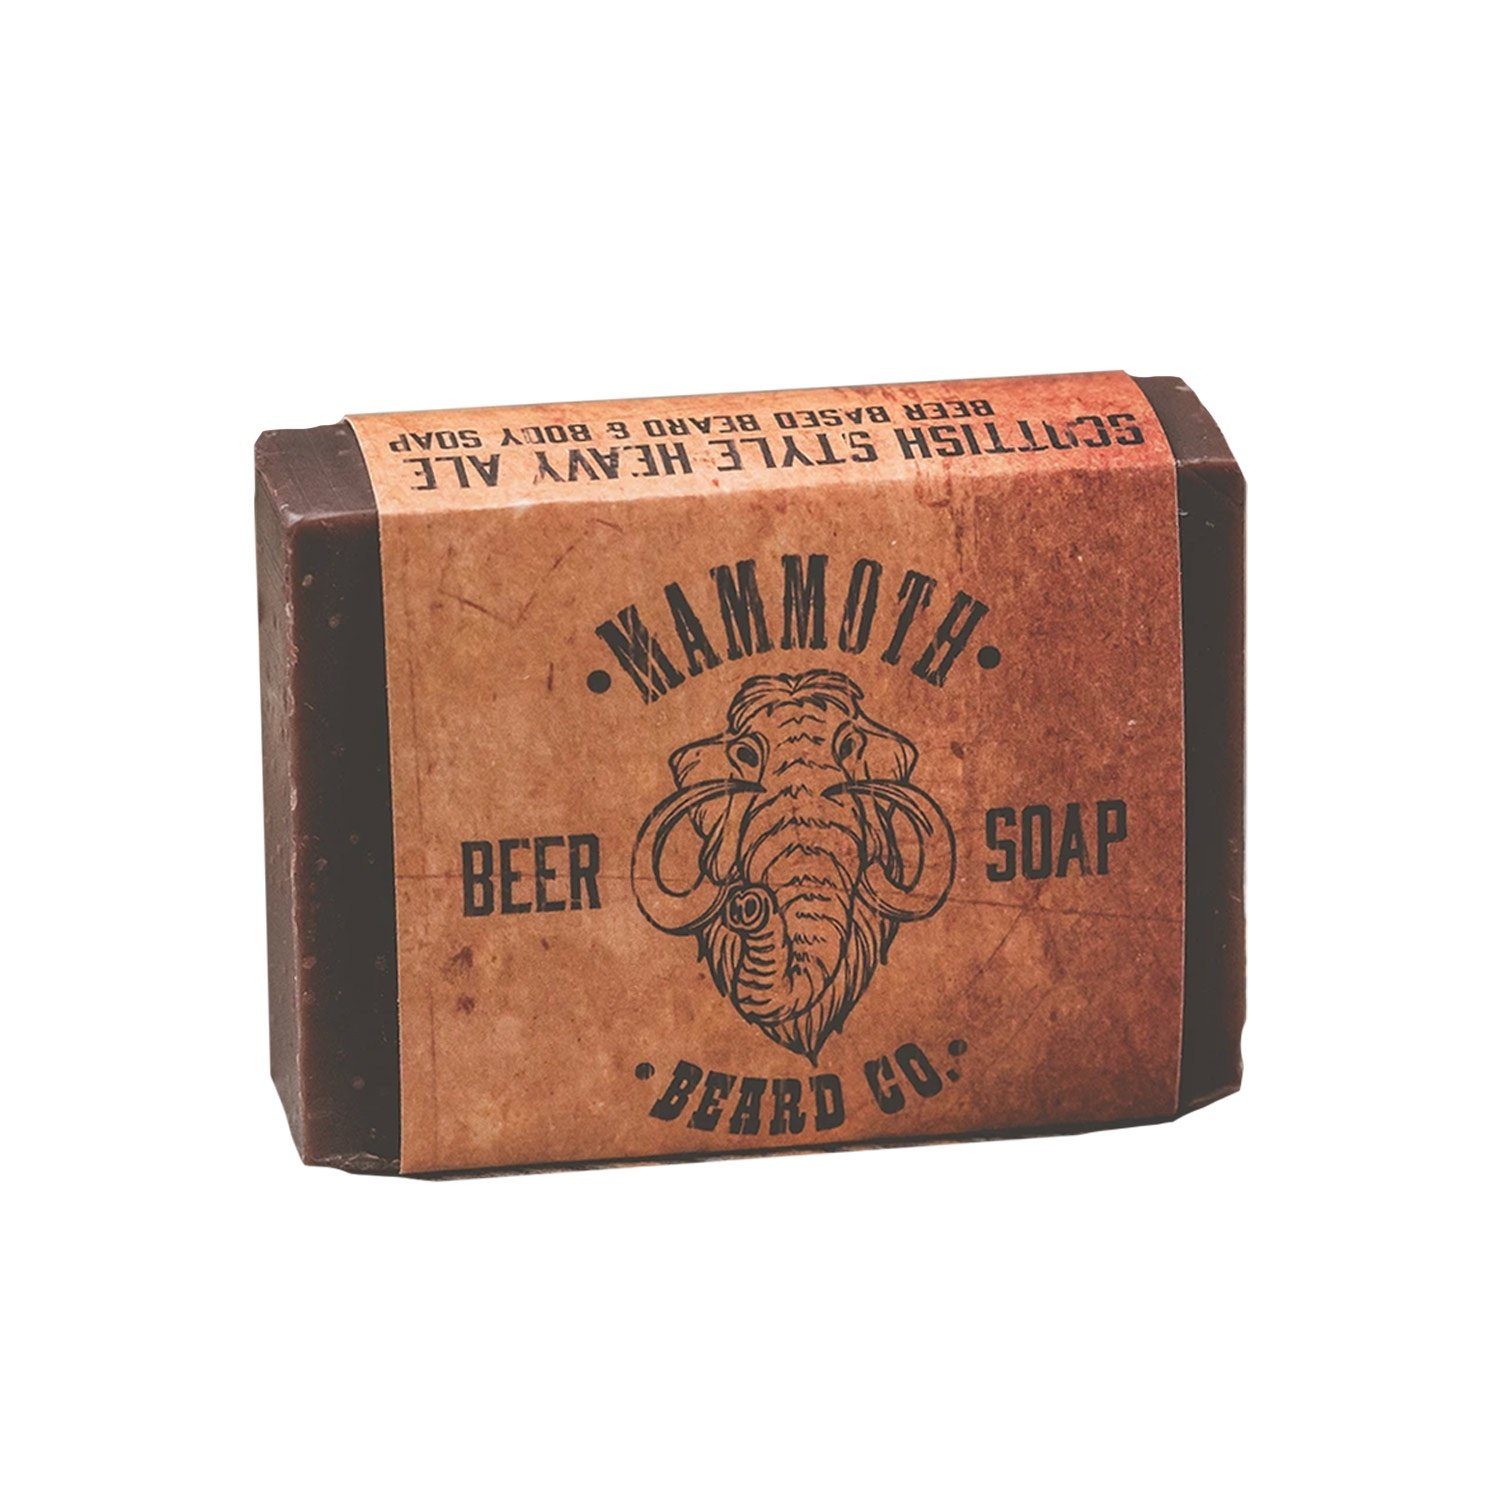 Scottish Ale Beer Soap Grooming Supplies Mammoth Beard Co. 